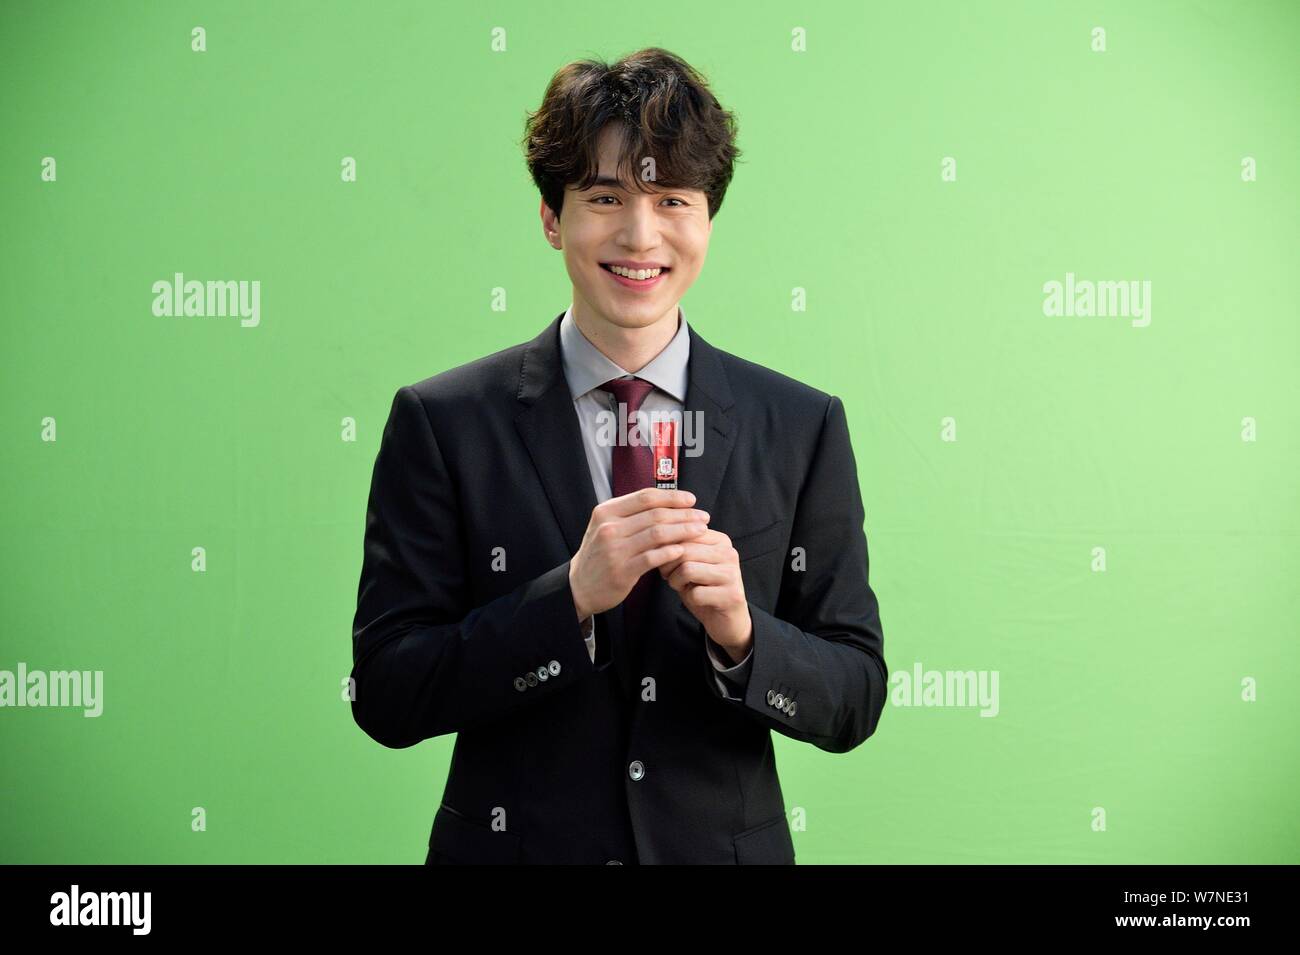 South Korean actor Lee Dong-wook, attends a photocall for the